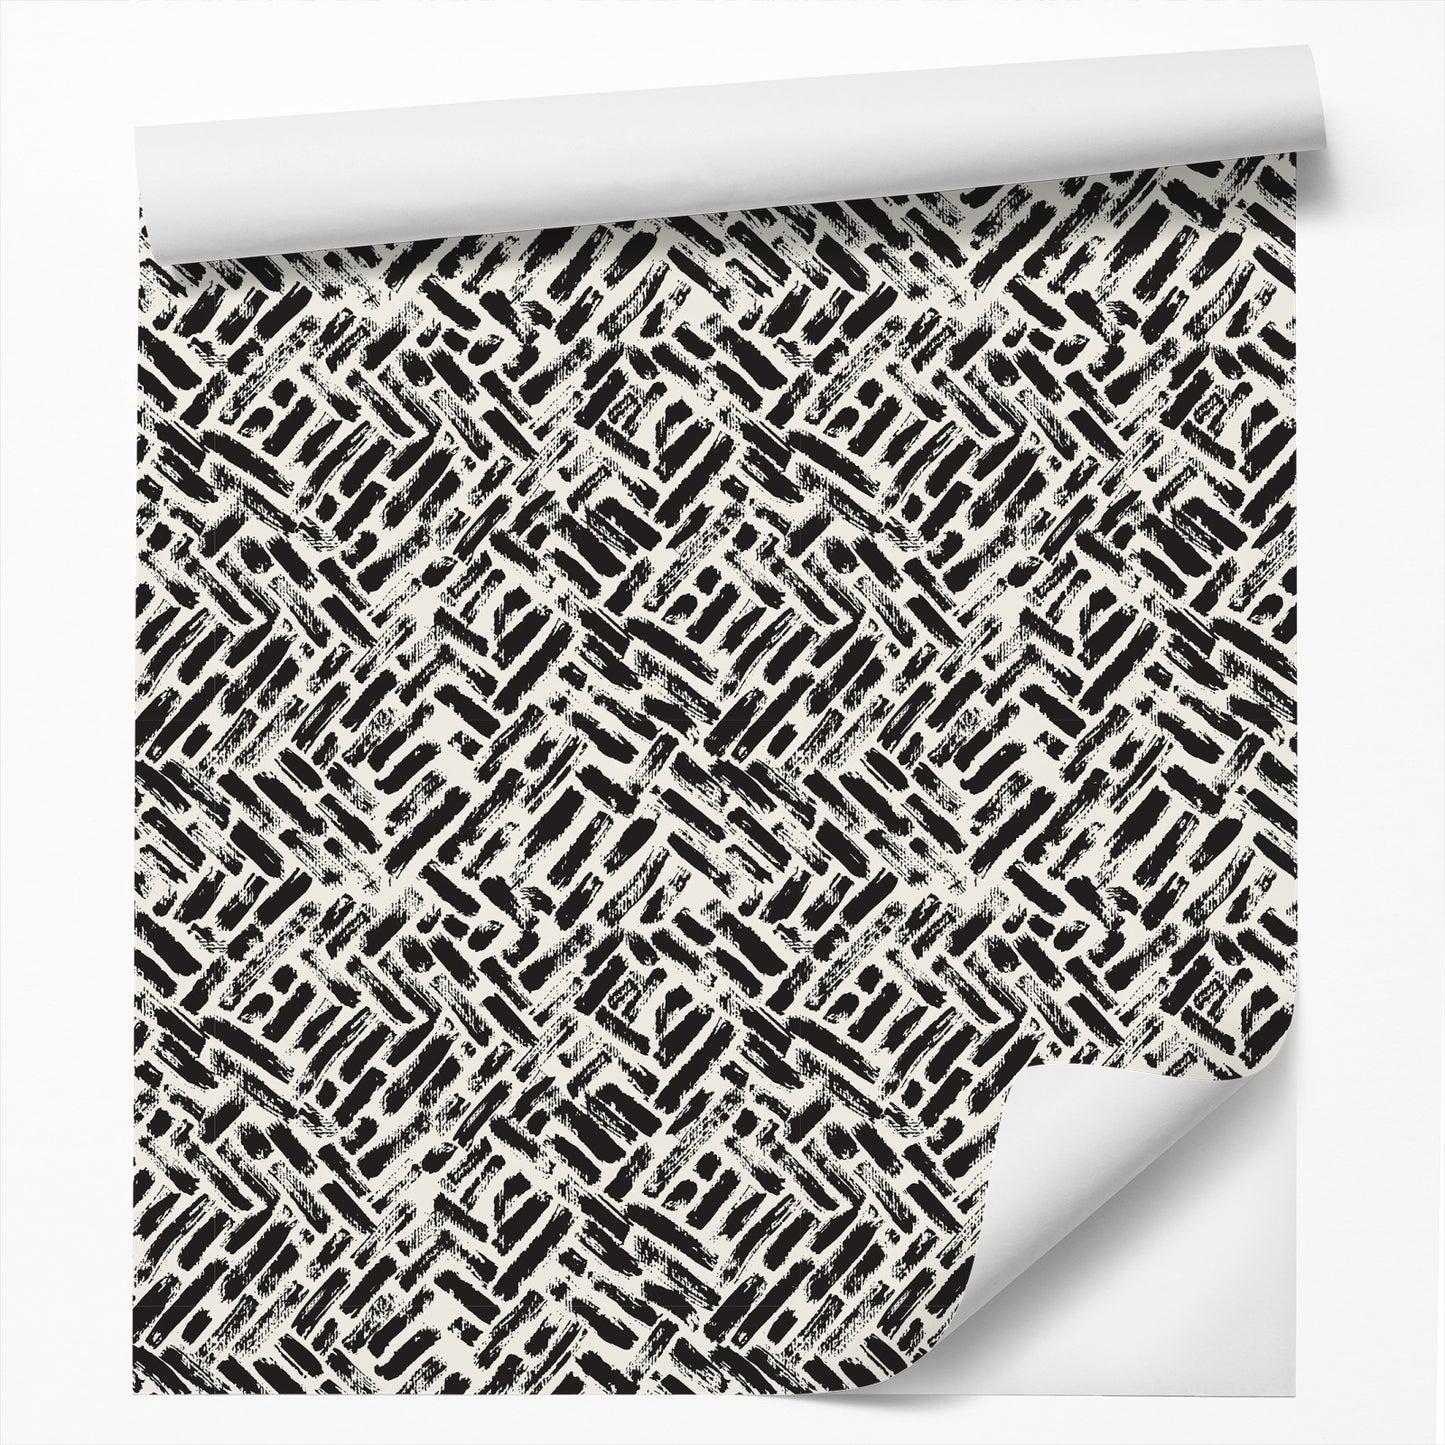 Peel & Stick Wallpaper Roll - Abstract Basketweave by DecoWorks